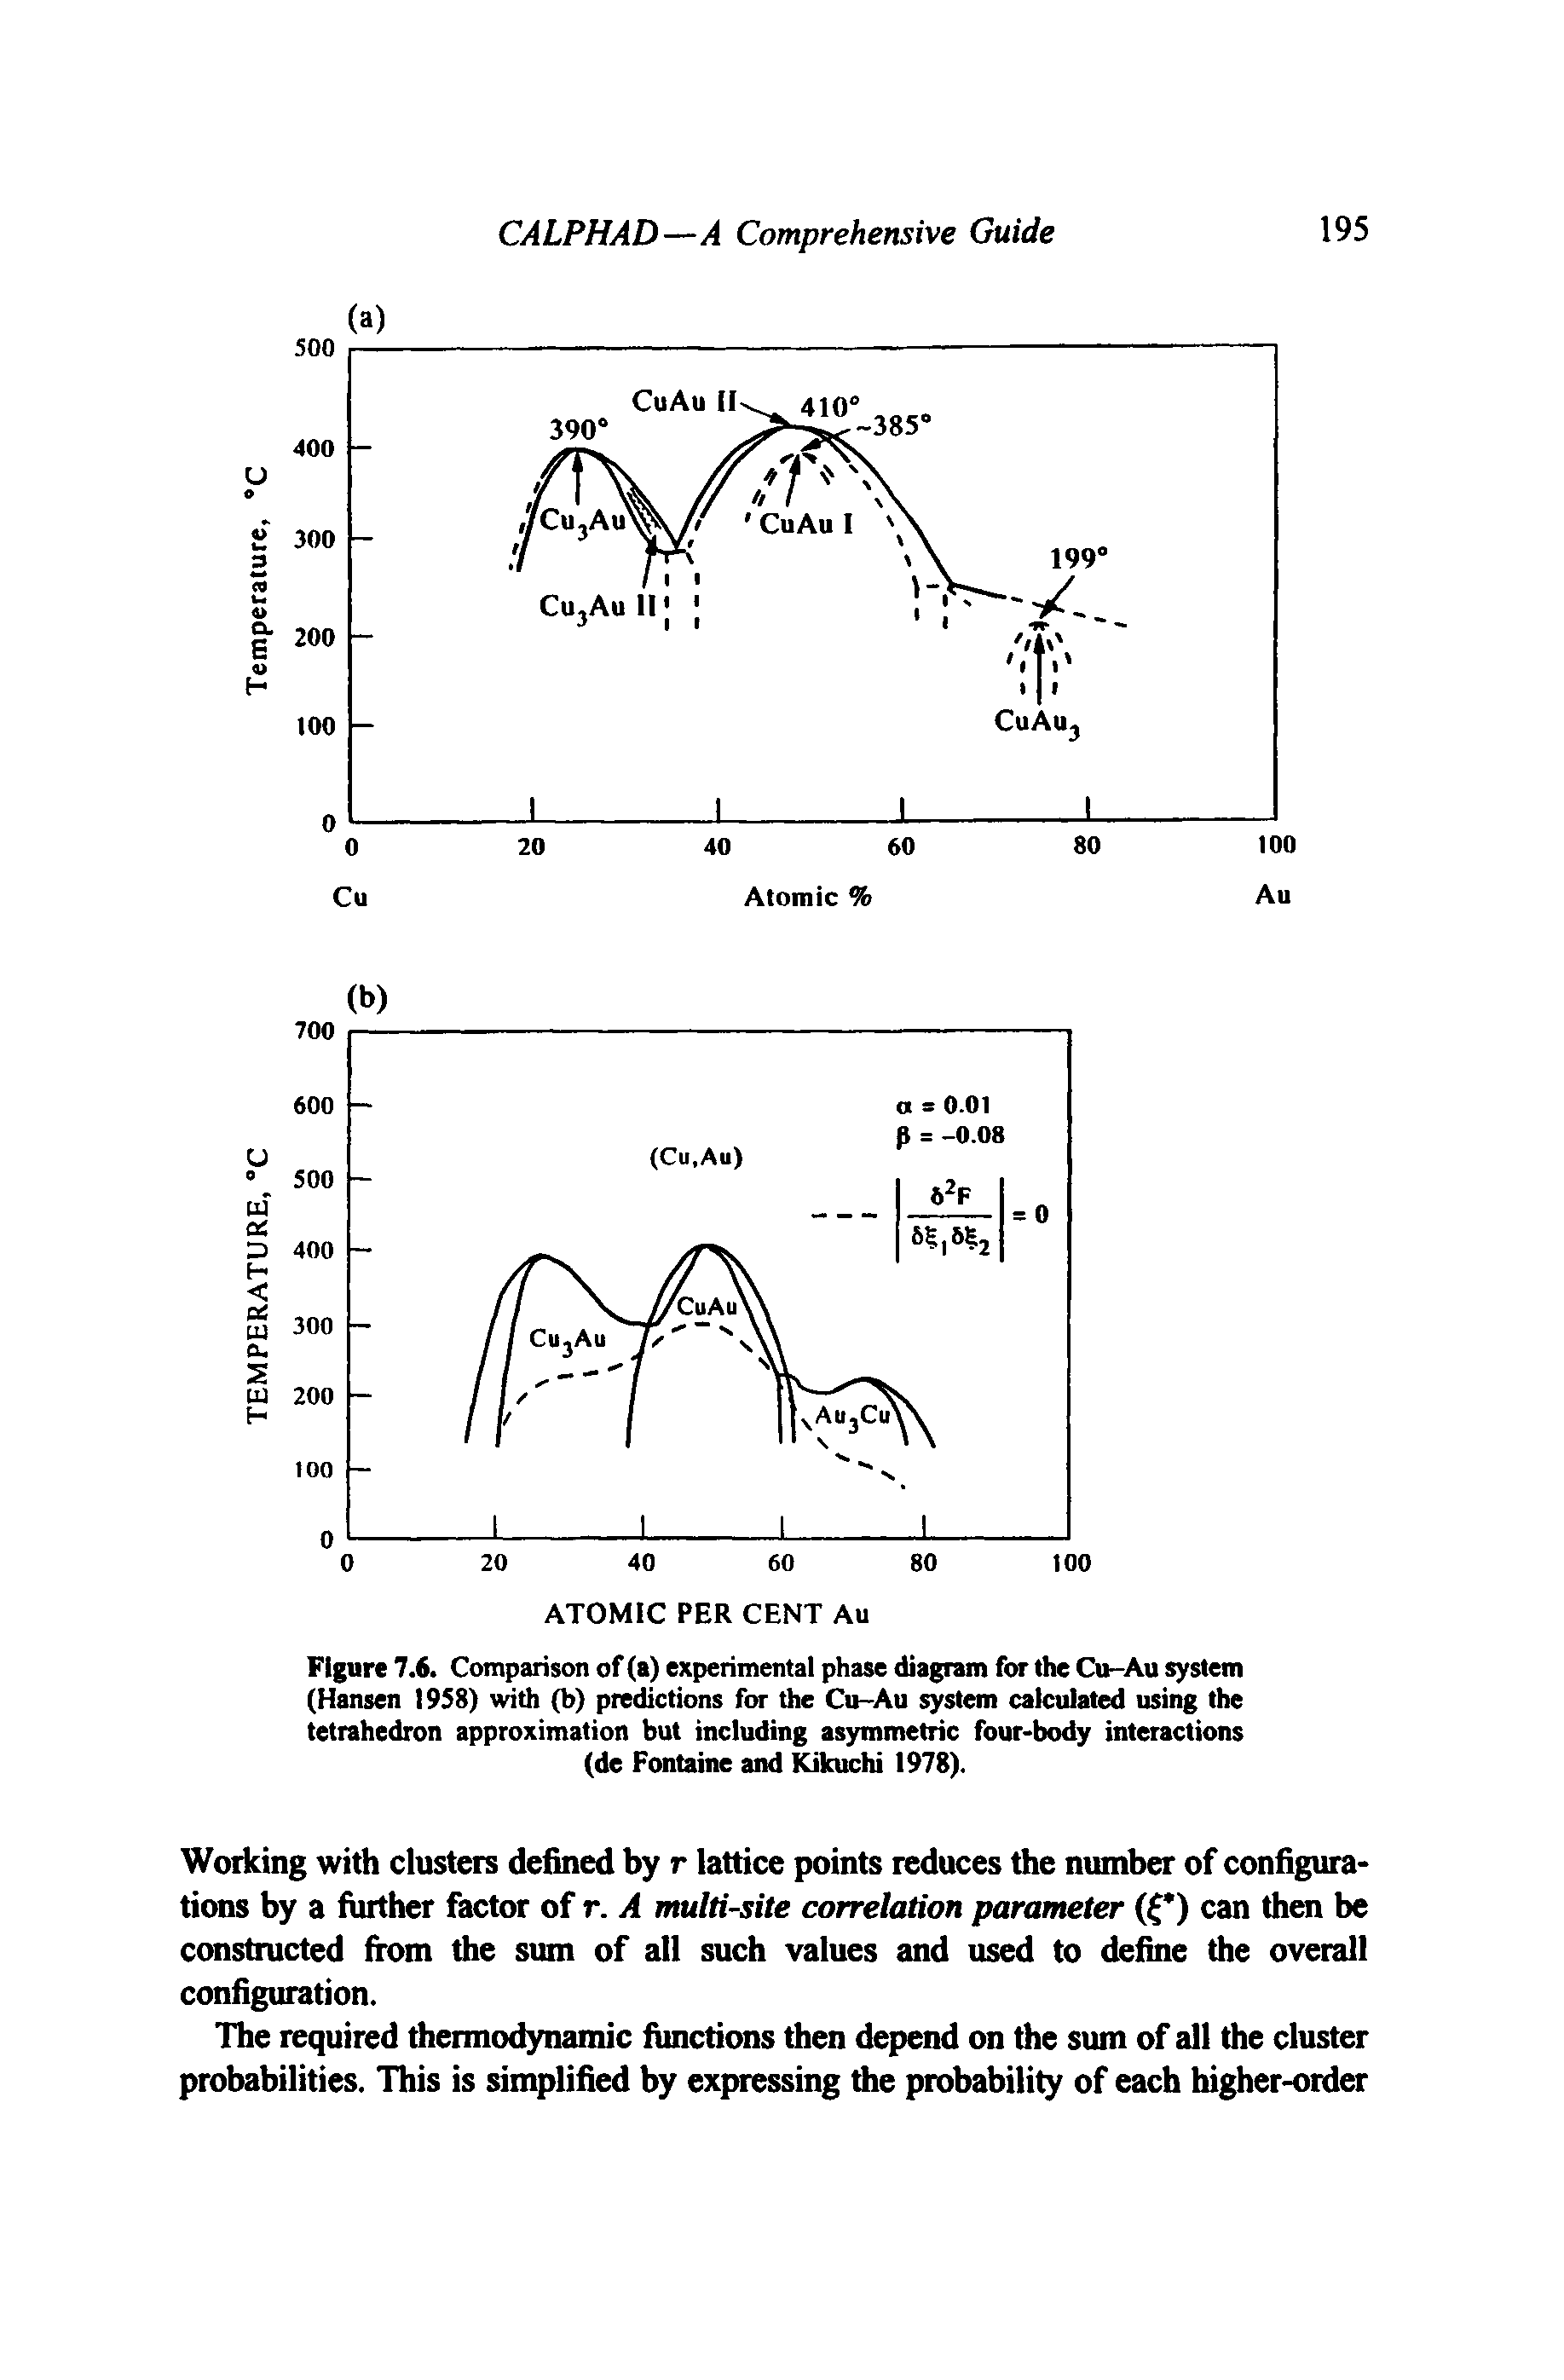 Figure 7.6. Comparison of (a) experimental phase diagram for the Cu-Au system (Hansen 1958) with (b) predictions for the Cu-Au system calculated using the tetrahedron approximation but including asymmetric four-body interactions (de Fontaine and Kikuchi 1978).